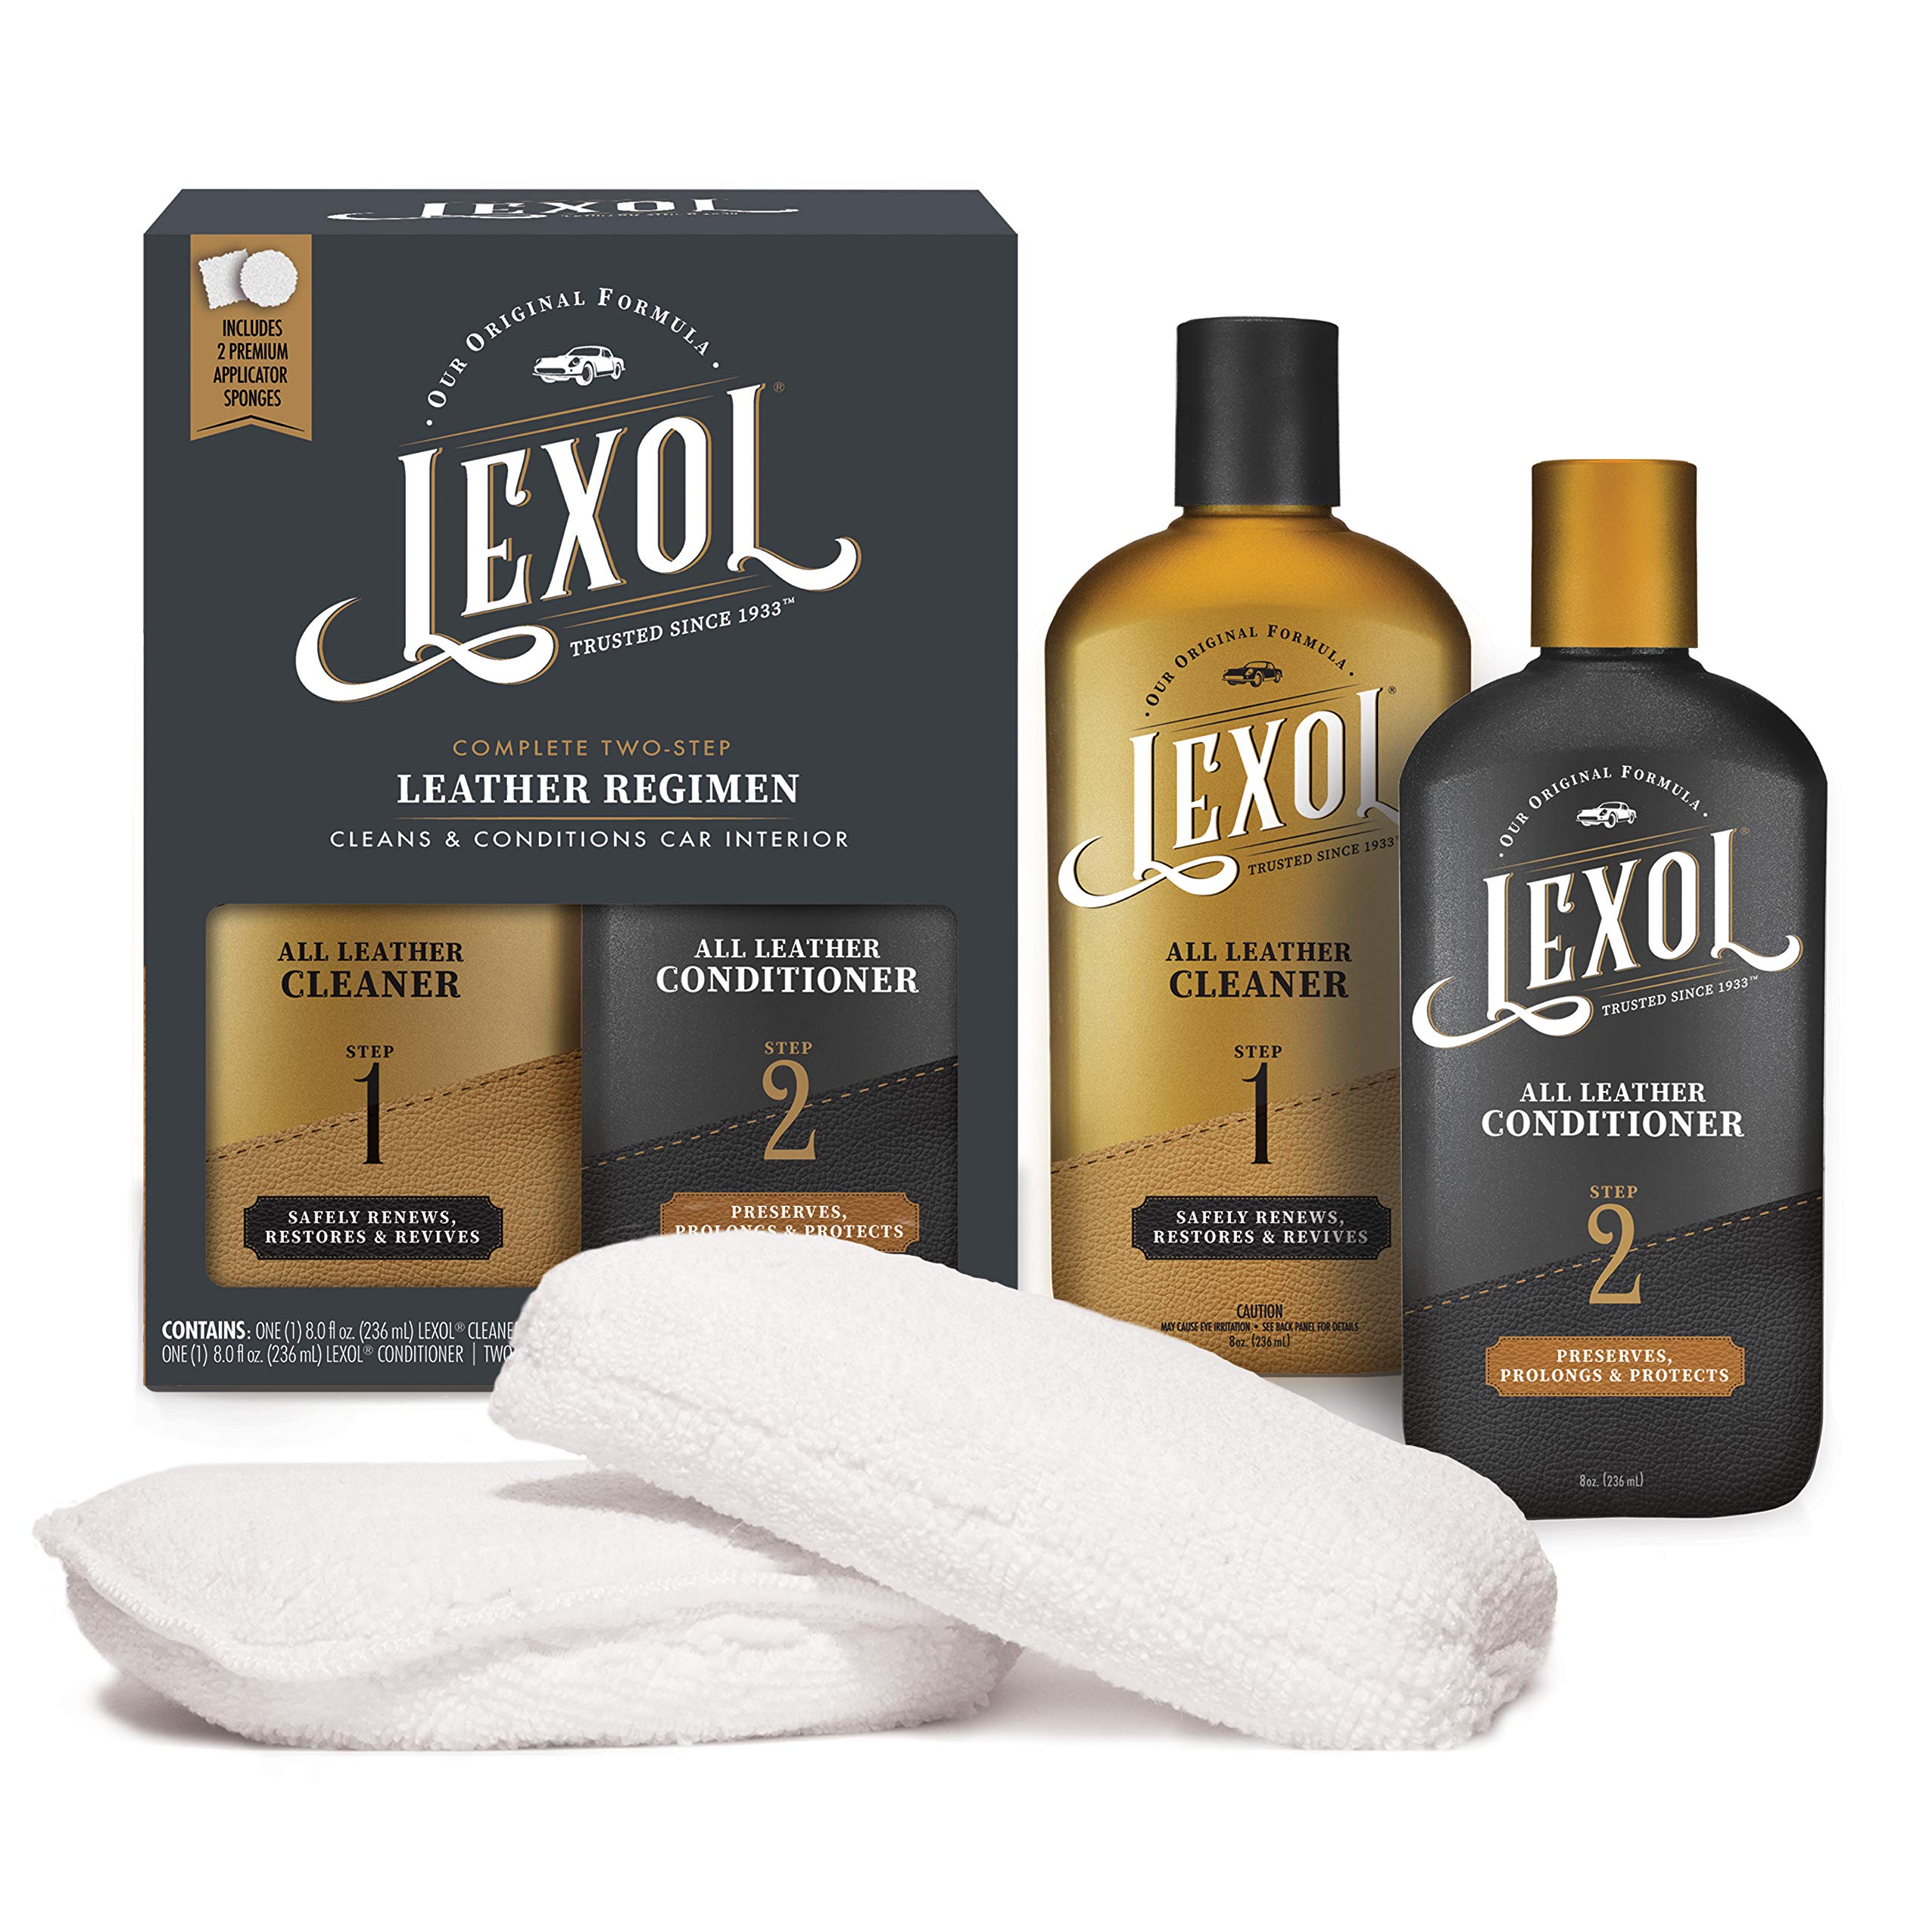 Lexol All Leather Cleaner and Conditioner Kit,Two 16.9 oz Bottles and Two Sponges $11.99